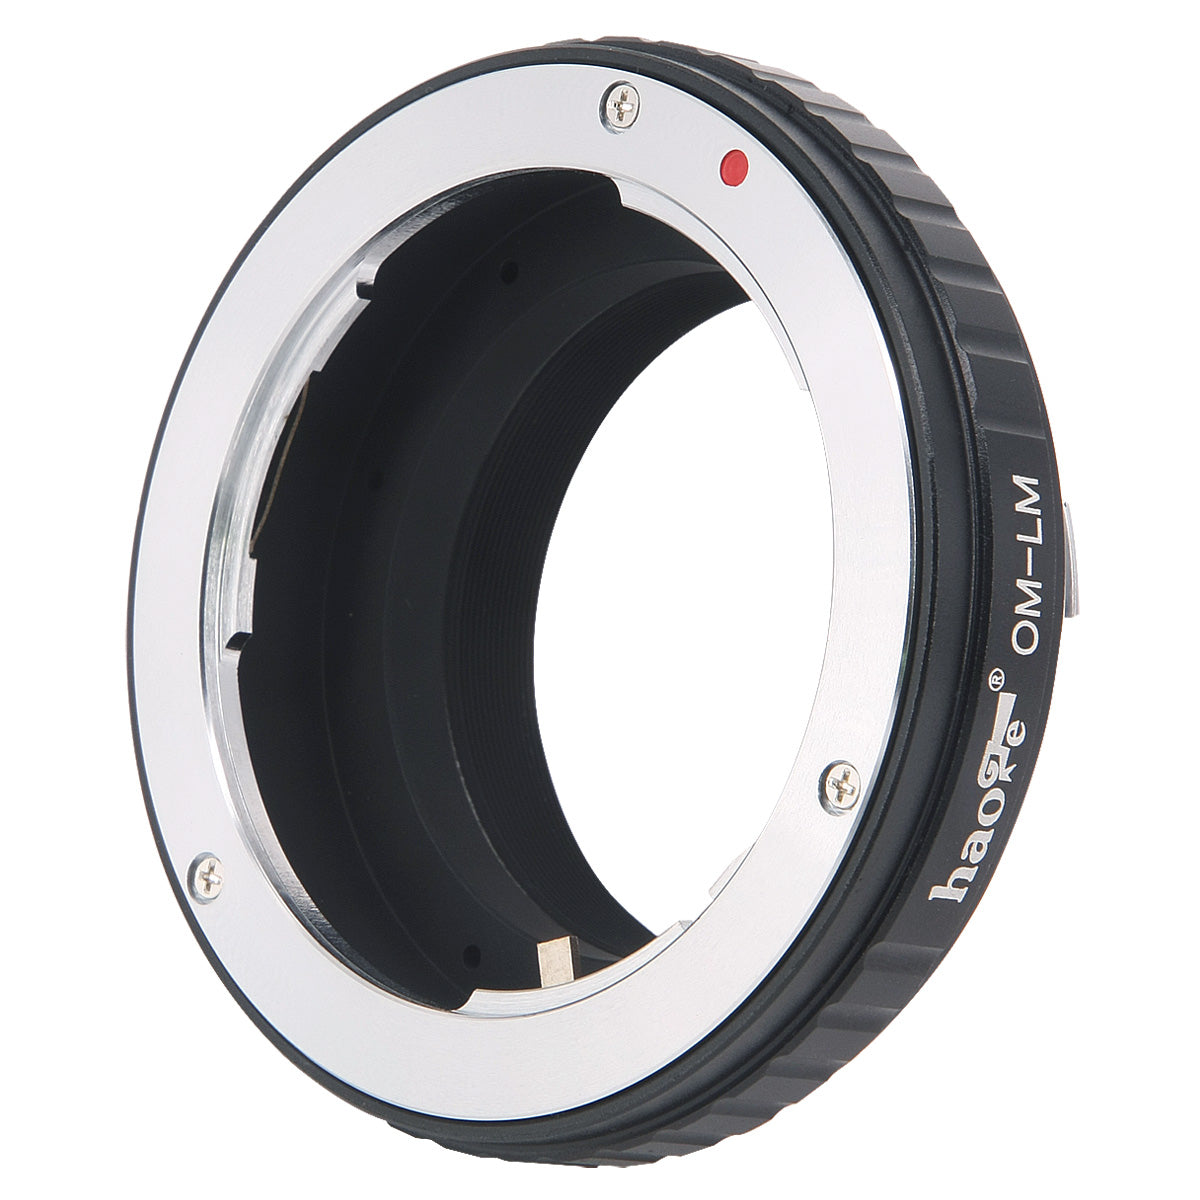 Haoge Lens Mount Adapter for Olympus OM mount Lens to Leica M-mount Camera such as M240, M240P, M262, M3, M2, M1, M4, M5, CL, M6, MP, M7, M8, M9, M9-P, M Monochrom, M-E, M, M-P, M10, M-A